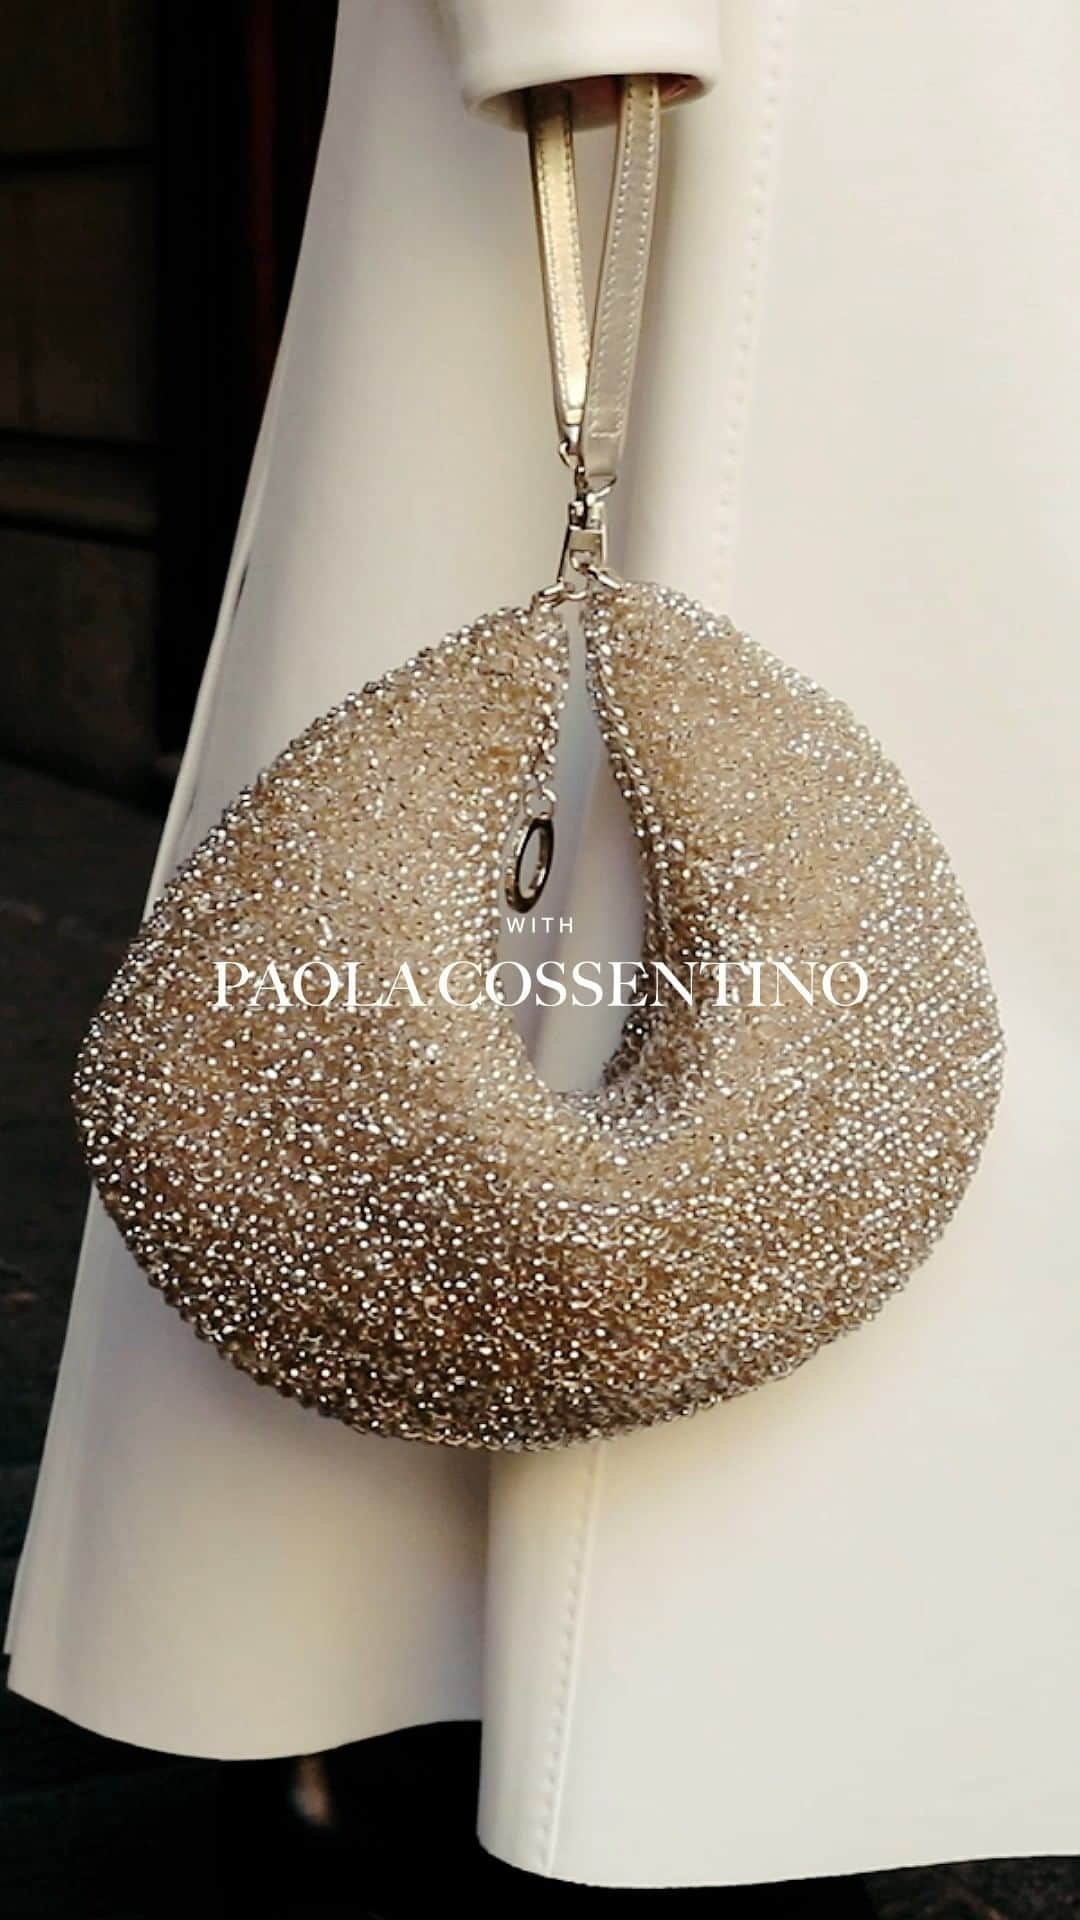 ANTEPRIMAのインスタグラム：「Milanese Elegance.  With a pure white ensemble of #ANTEPRIMA #SS23 show look, @paola_cossentino picked the FORTUNA WIREBAG in iconic Orogento shade to add sparkles at her surrounding.   Shop the FORTUNA WIREBAG now.  #ANTEPRIMA30 #SpringSummer2023 #SS23 #ANTEPRIMA #WIREBAG #MilanStyle #Milan #MilanFashion #Miniature #MicroBag #MiniBag #CraftBag #CrochetBag #Handcraft #KnitBag #WorkBag #ItalianDesign #Craftmanship #アンテプリマ」